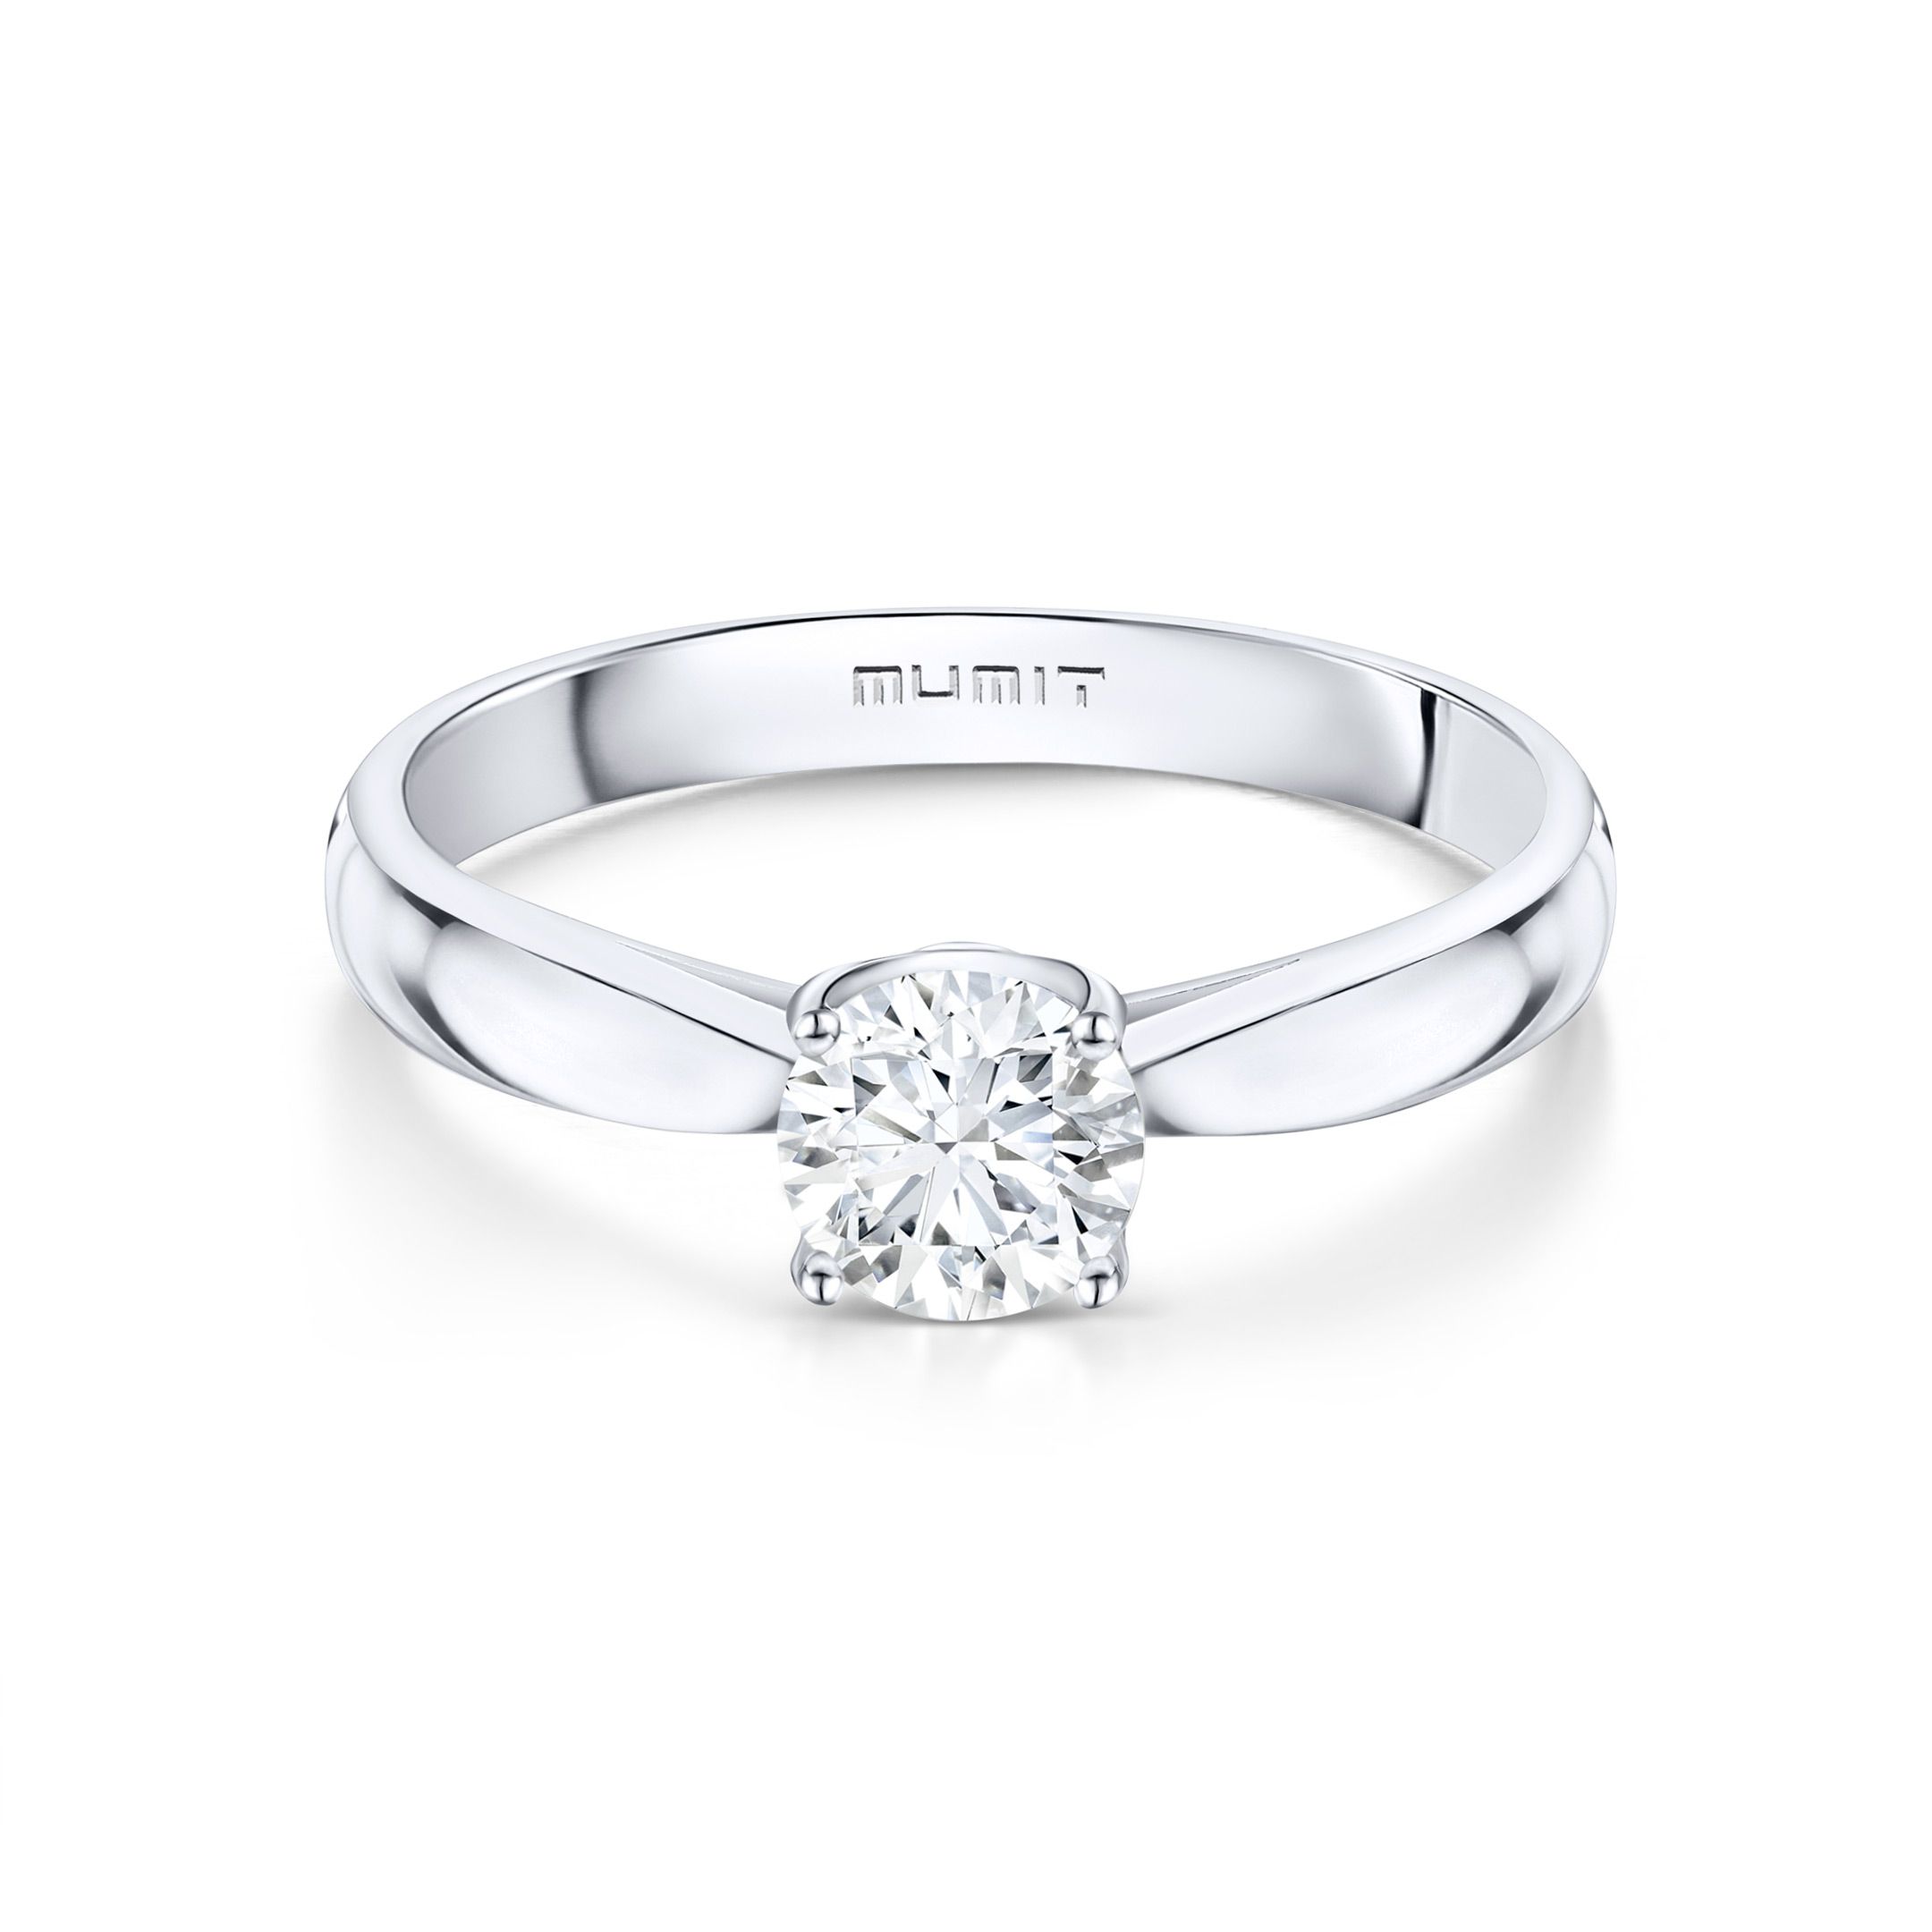 Luxury Design 2.50 Carat Diamond 18K White Gold Engagement Ring - Ajretail  Your One-Stop Destination for Lab Grown Diamonds, Gemstones, and Jewelry  Wholesale and Export